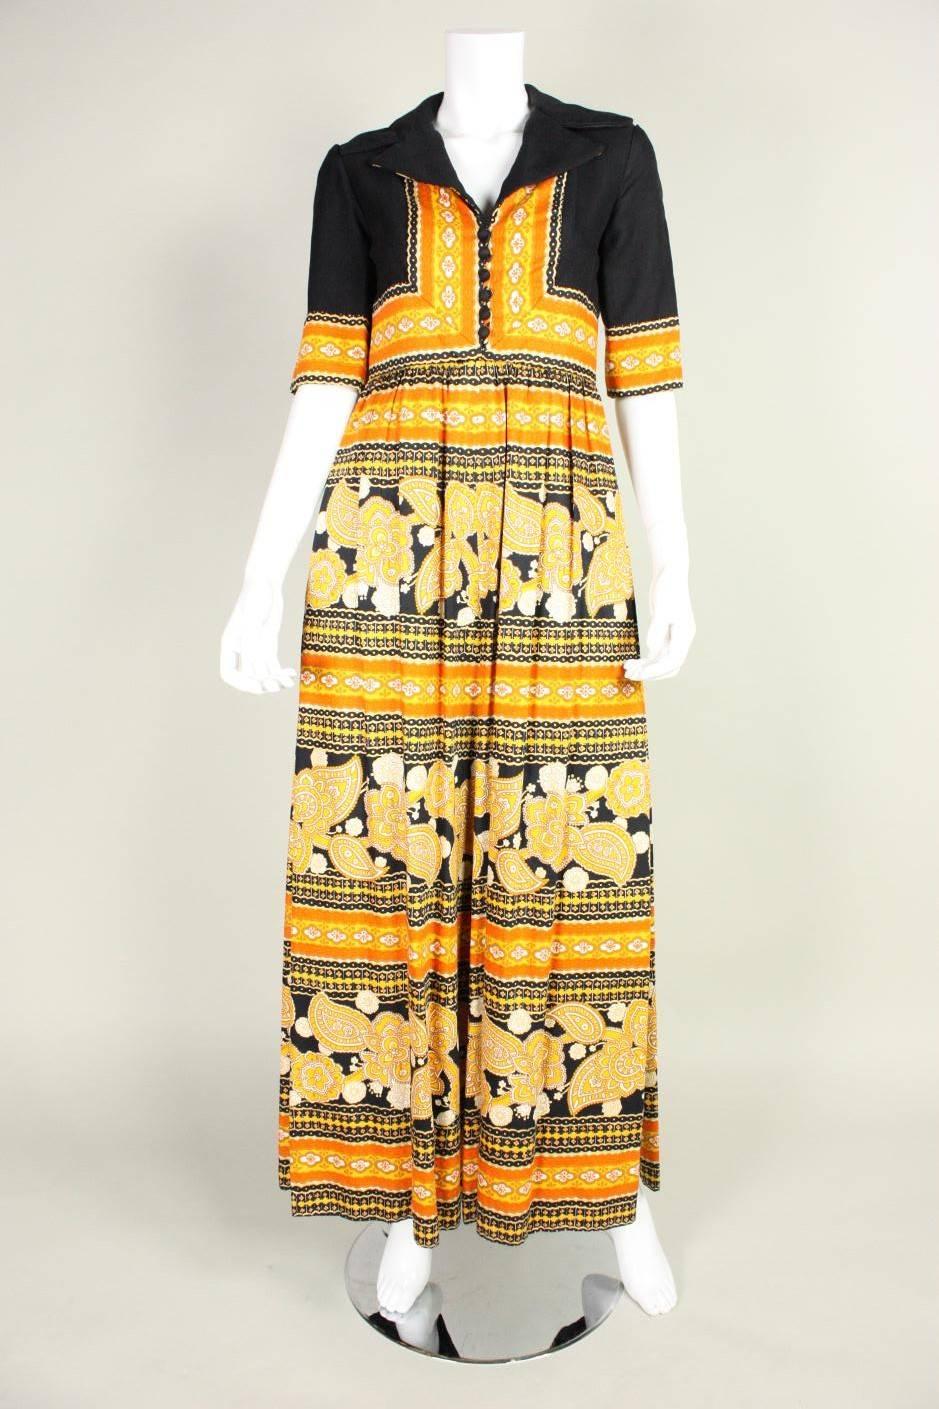 Jumpsuit from Oscar de la Renta Boutique dates to the 1970's.  Black cotton pique bodice has v-neck, turn down collar, and decorative covered buttons down the center front.  Wide pant legs are made of brightly fabrics in hues of yellow and orange. 